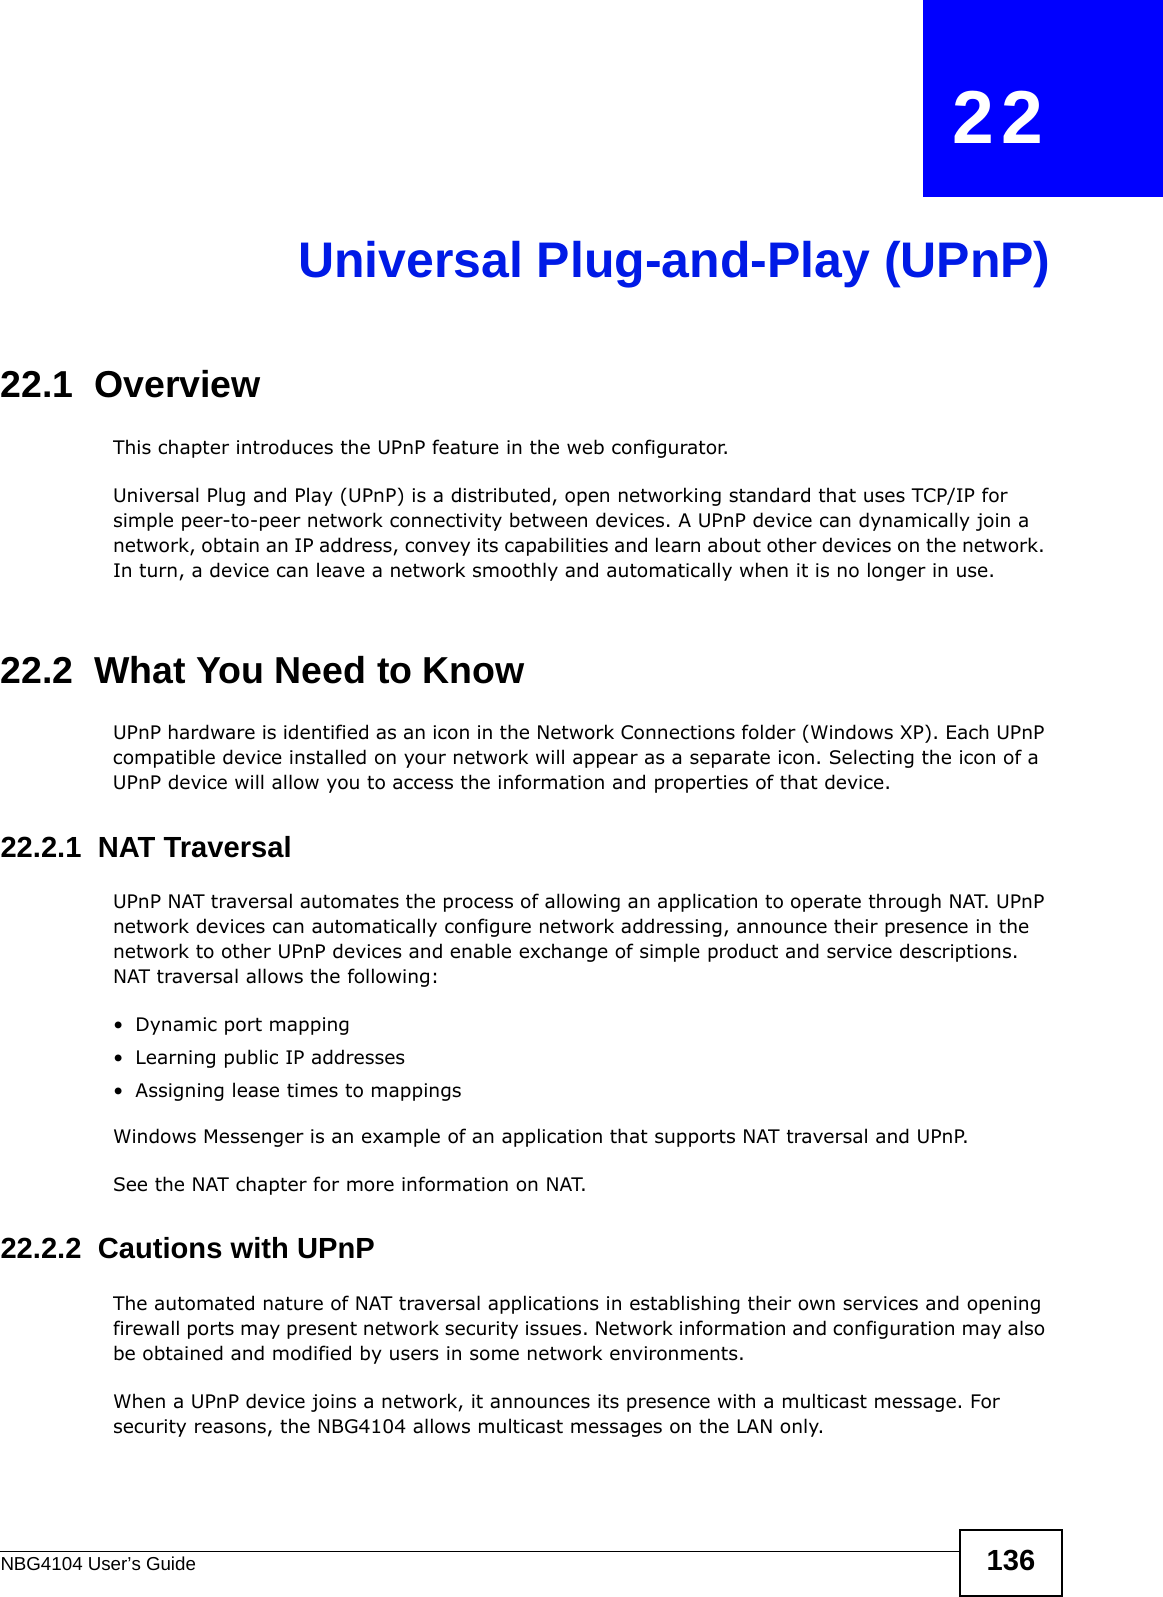 NBG4104 User’s Guide 136CHAPTER   22Universal Plug-and-Play (UPnP)22.1  Overview This chapter introduces the UPnP feature in the web configurator.Universal Plug and Play (UPnP) is a distributed, open networking standard that uses TCP/IP for simple peer-to-peer network connectivity between devices. A UPnP device can dynamically join a network, obtain an IP address, convey its capabilities and learn about other devices on the network. In turn, a device can leave a network smoothly and automatically when it is no longer in use.22.2  What You Need to KnowUPnP hardware is identified as an icon in the Network Connections folder (Windows XP). Each UPnP compatible device installed on your network will appear as a separate icon. Selecting the icon of a UPnP device will allow you to access the information and properties of that device. 22.2.1  NAT TraversalUPnP NAT traversal automates the process of allowing an application to operate through NAT. UPnP network devices can automatically configure network addressing, announce their presence in the network to other UPnP devices and enable exchange of simple product and service descriptions. NAT traversal allows the following:• Dynamic port mapping• Learning public IP addresses• Assigning lease times to mappingsWindows Messenger is an example of an application that supports NAT traversal and UPnP. See the NAT chapter for more information on NAT.22.2.2  Cautions with UPnPThe automated nature of NAT traversal applications in establishing their own services and opening firewall ports may present network security issues. Network information and configuration may also be obtained and modified by users in some network environments. When a UPnP device joins a network, it announces its presence with a multicast message. For security reasons, the NBG4104 allows multicast messages on the LAN only.